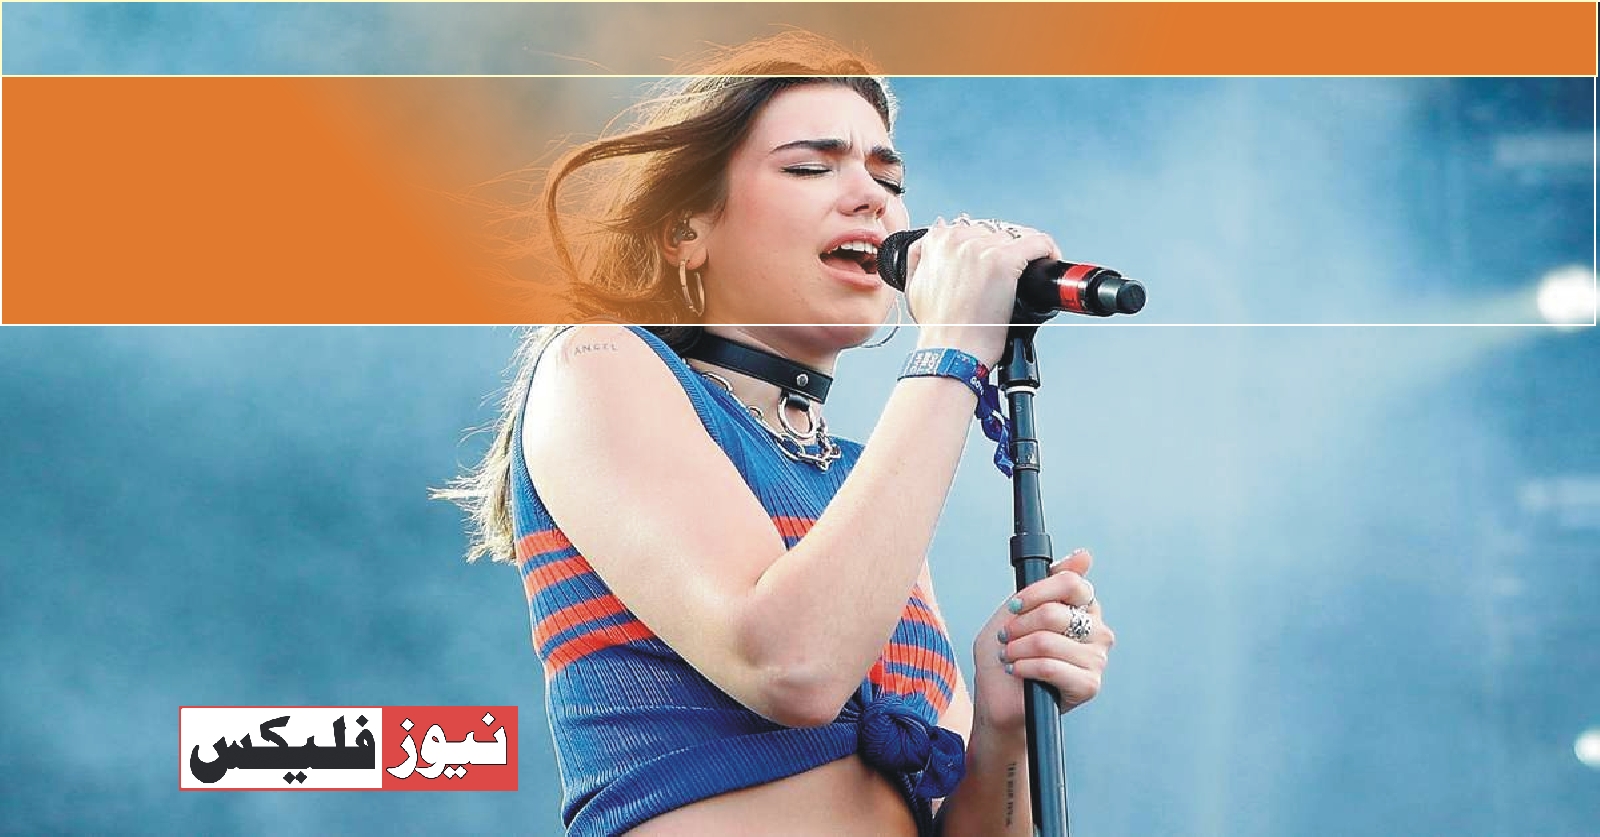 Dua Lipa becomes second most listened to singer on Spotify